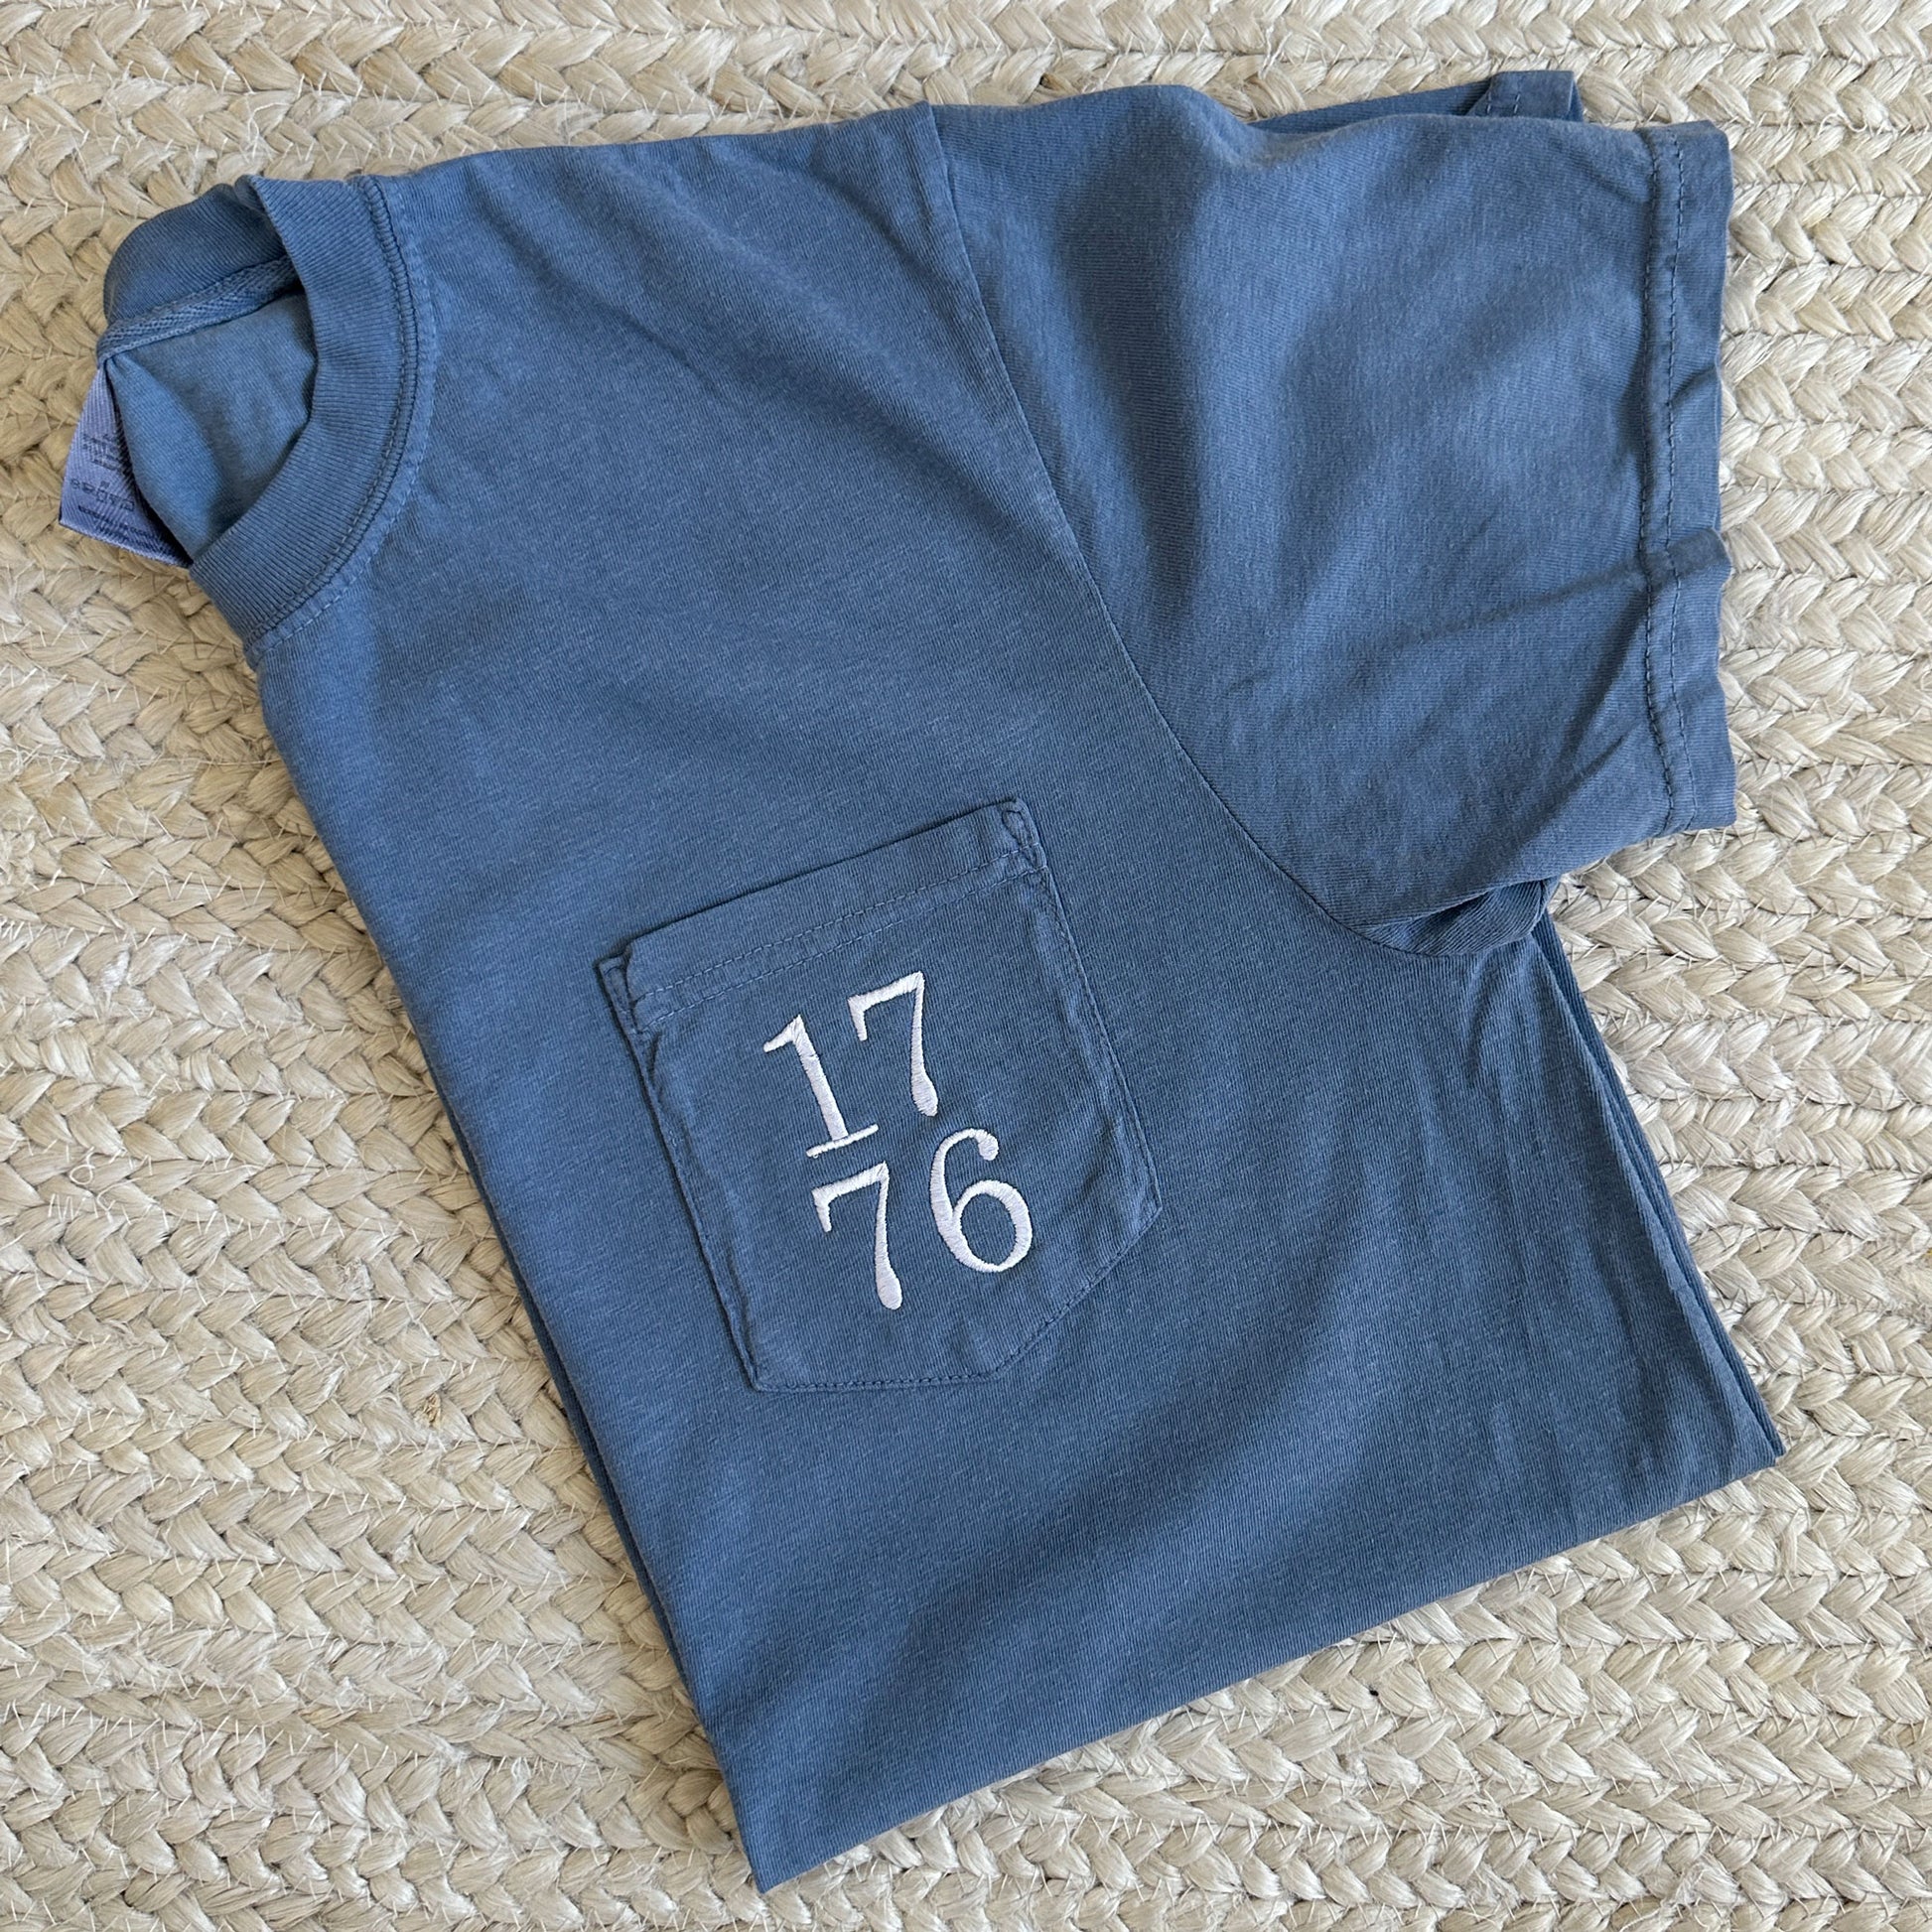 blue pocket tee with 1776 embroidered stacked design